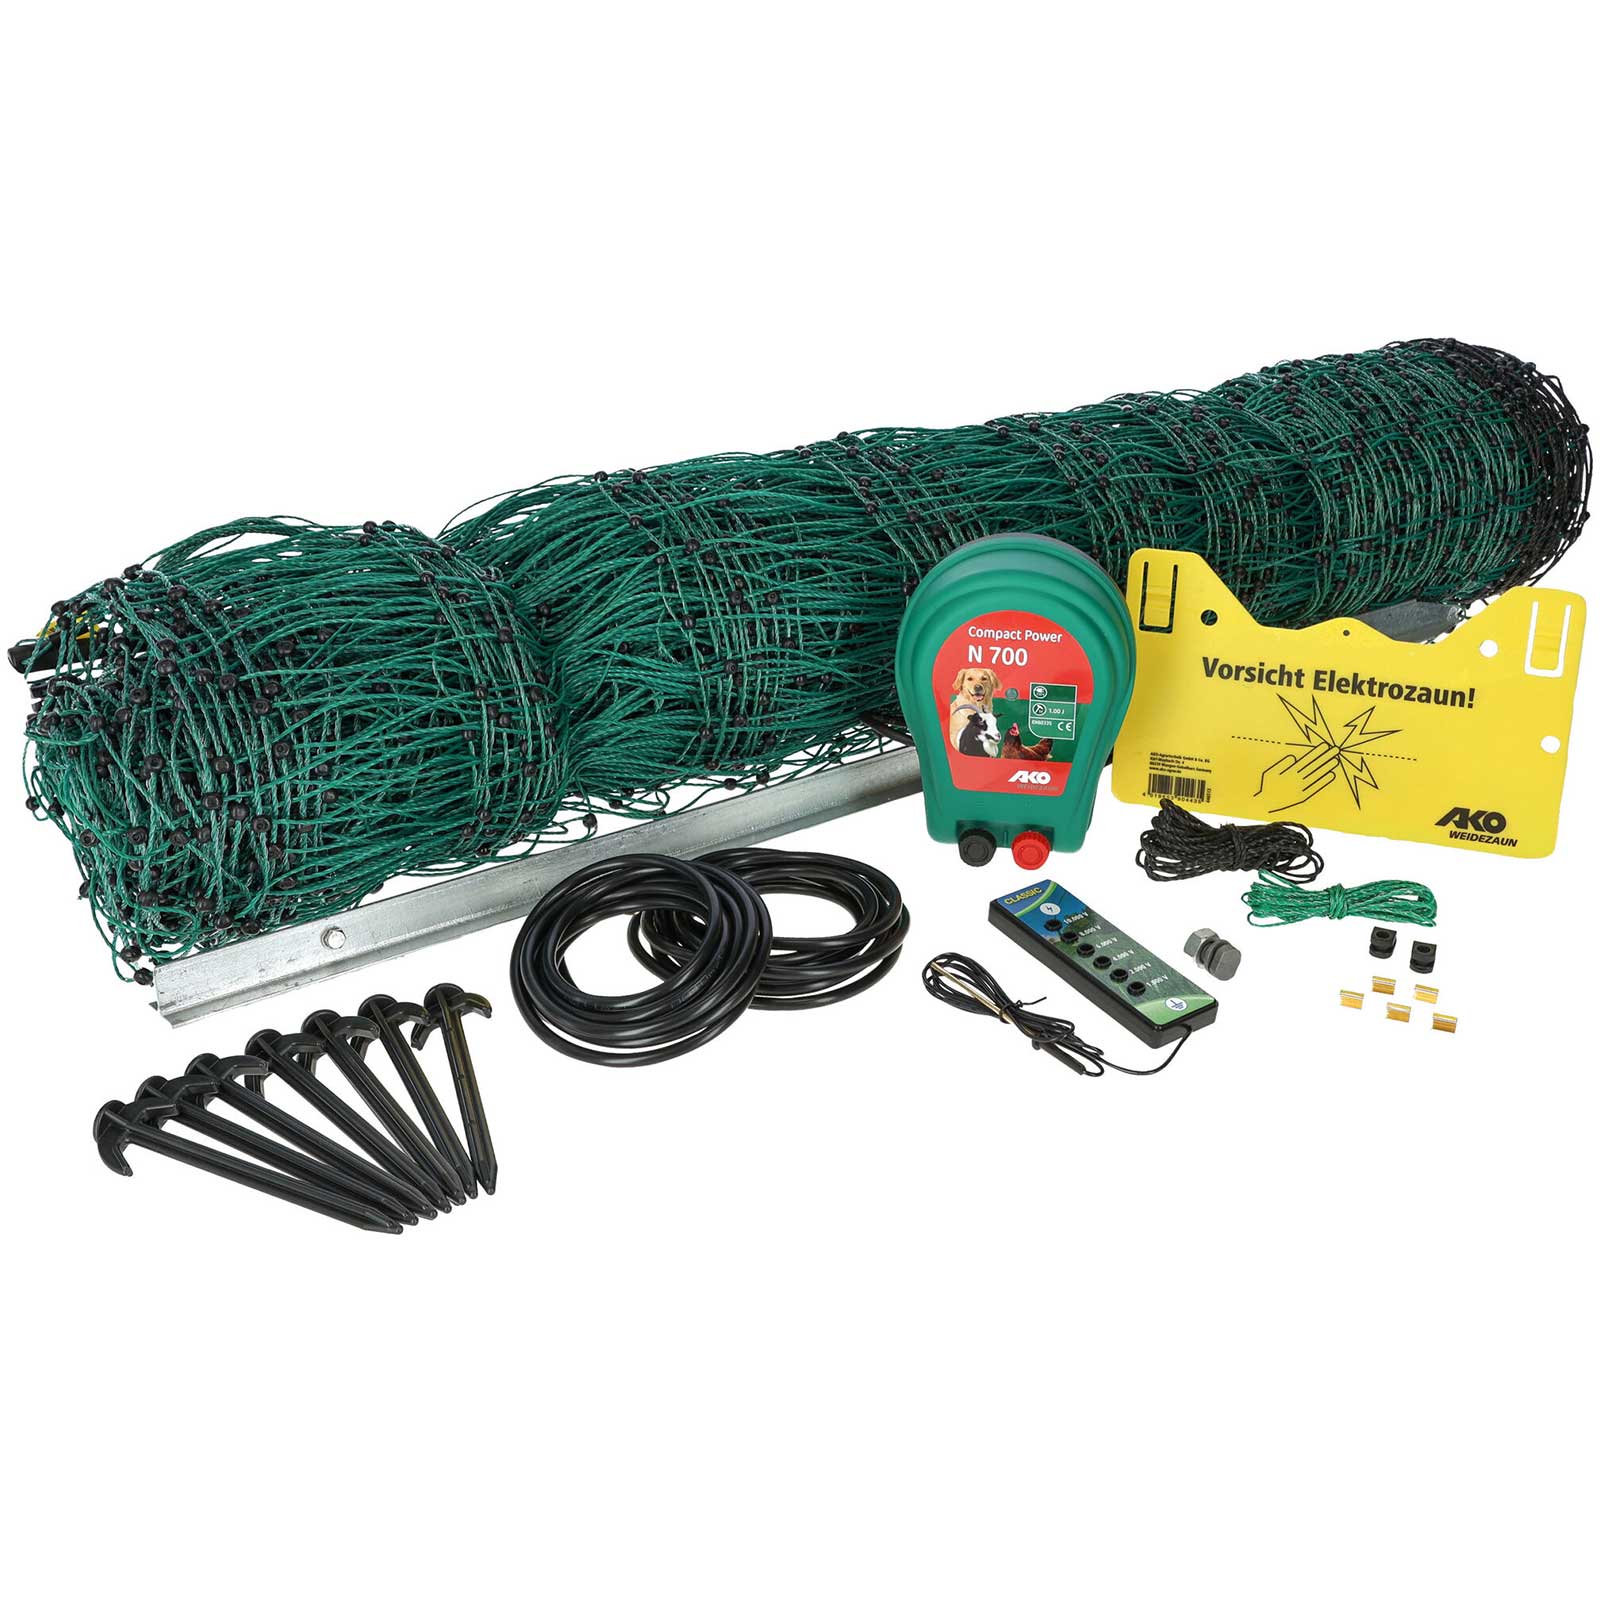 Poultry net set 50 m, green incl. 230v device + accessories